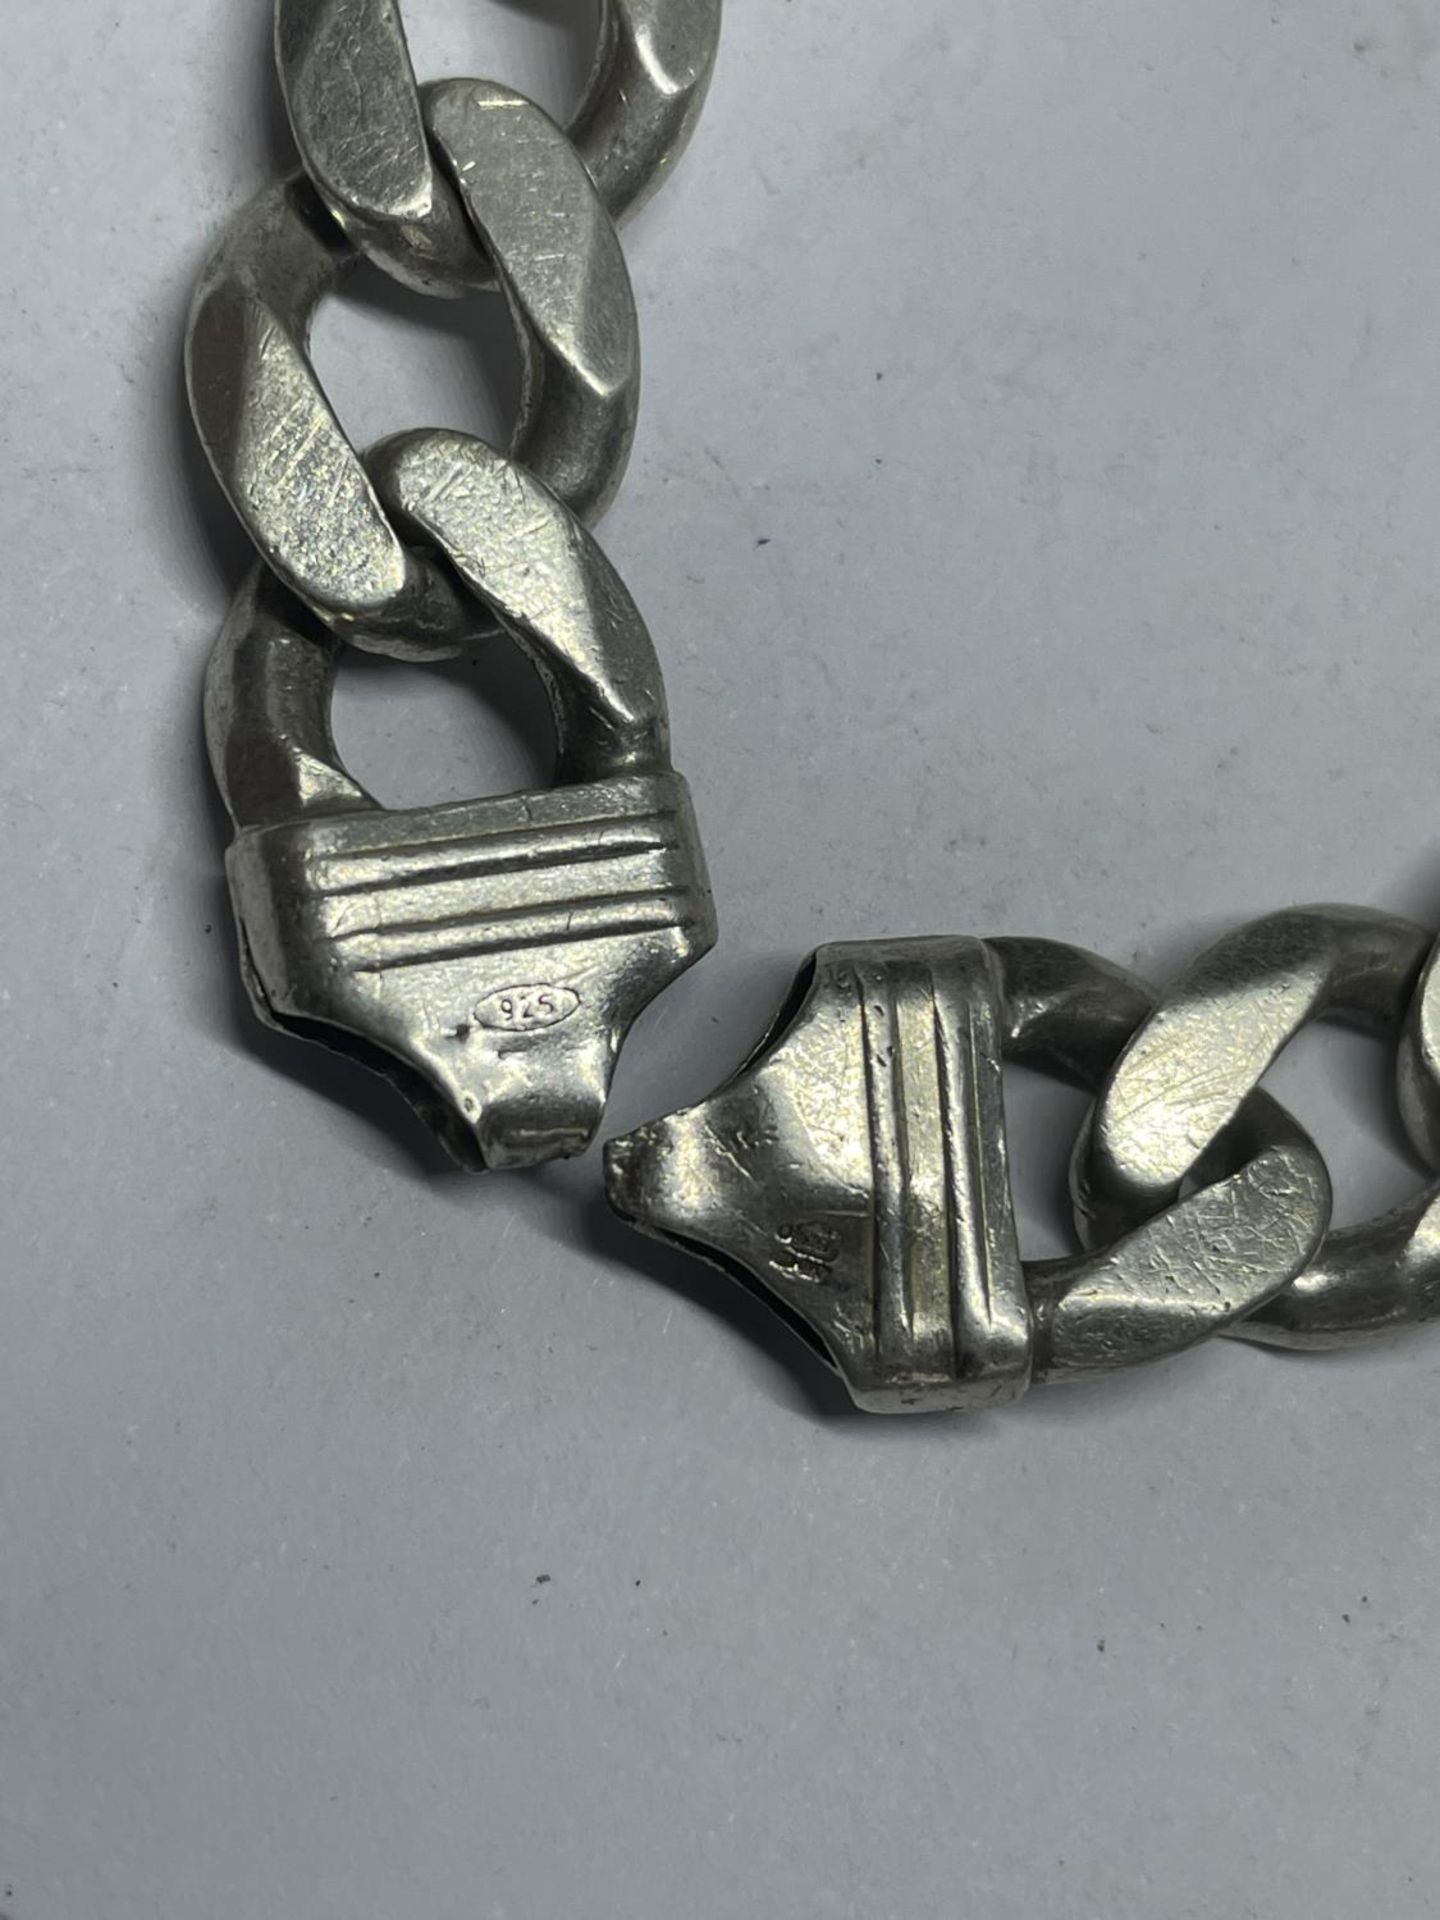 A HEAVY MARKED SILVER FLAT LINK BRACELET LENGTH 18CM WEIGHT 39.9 GRAMS - Image 2 of 2